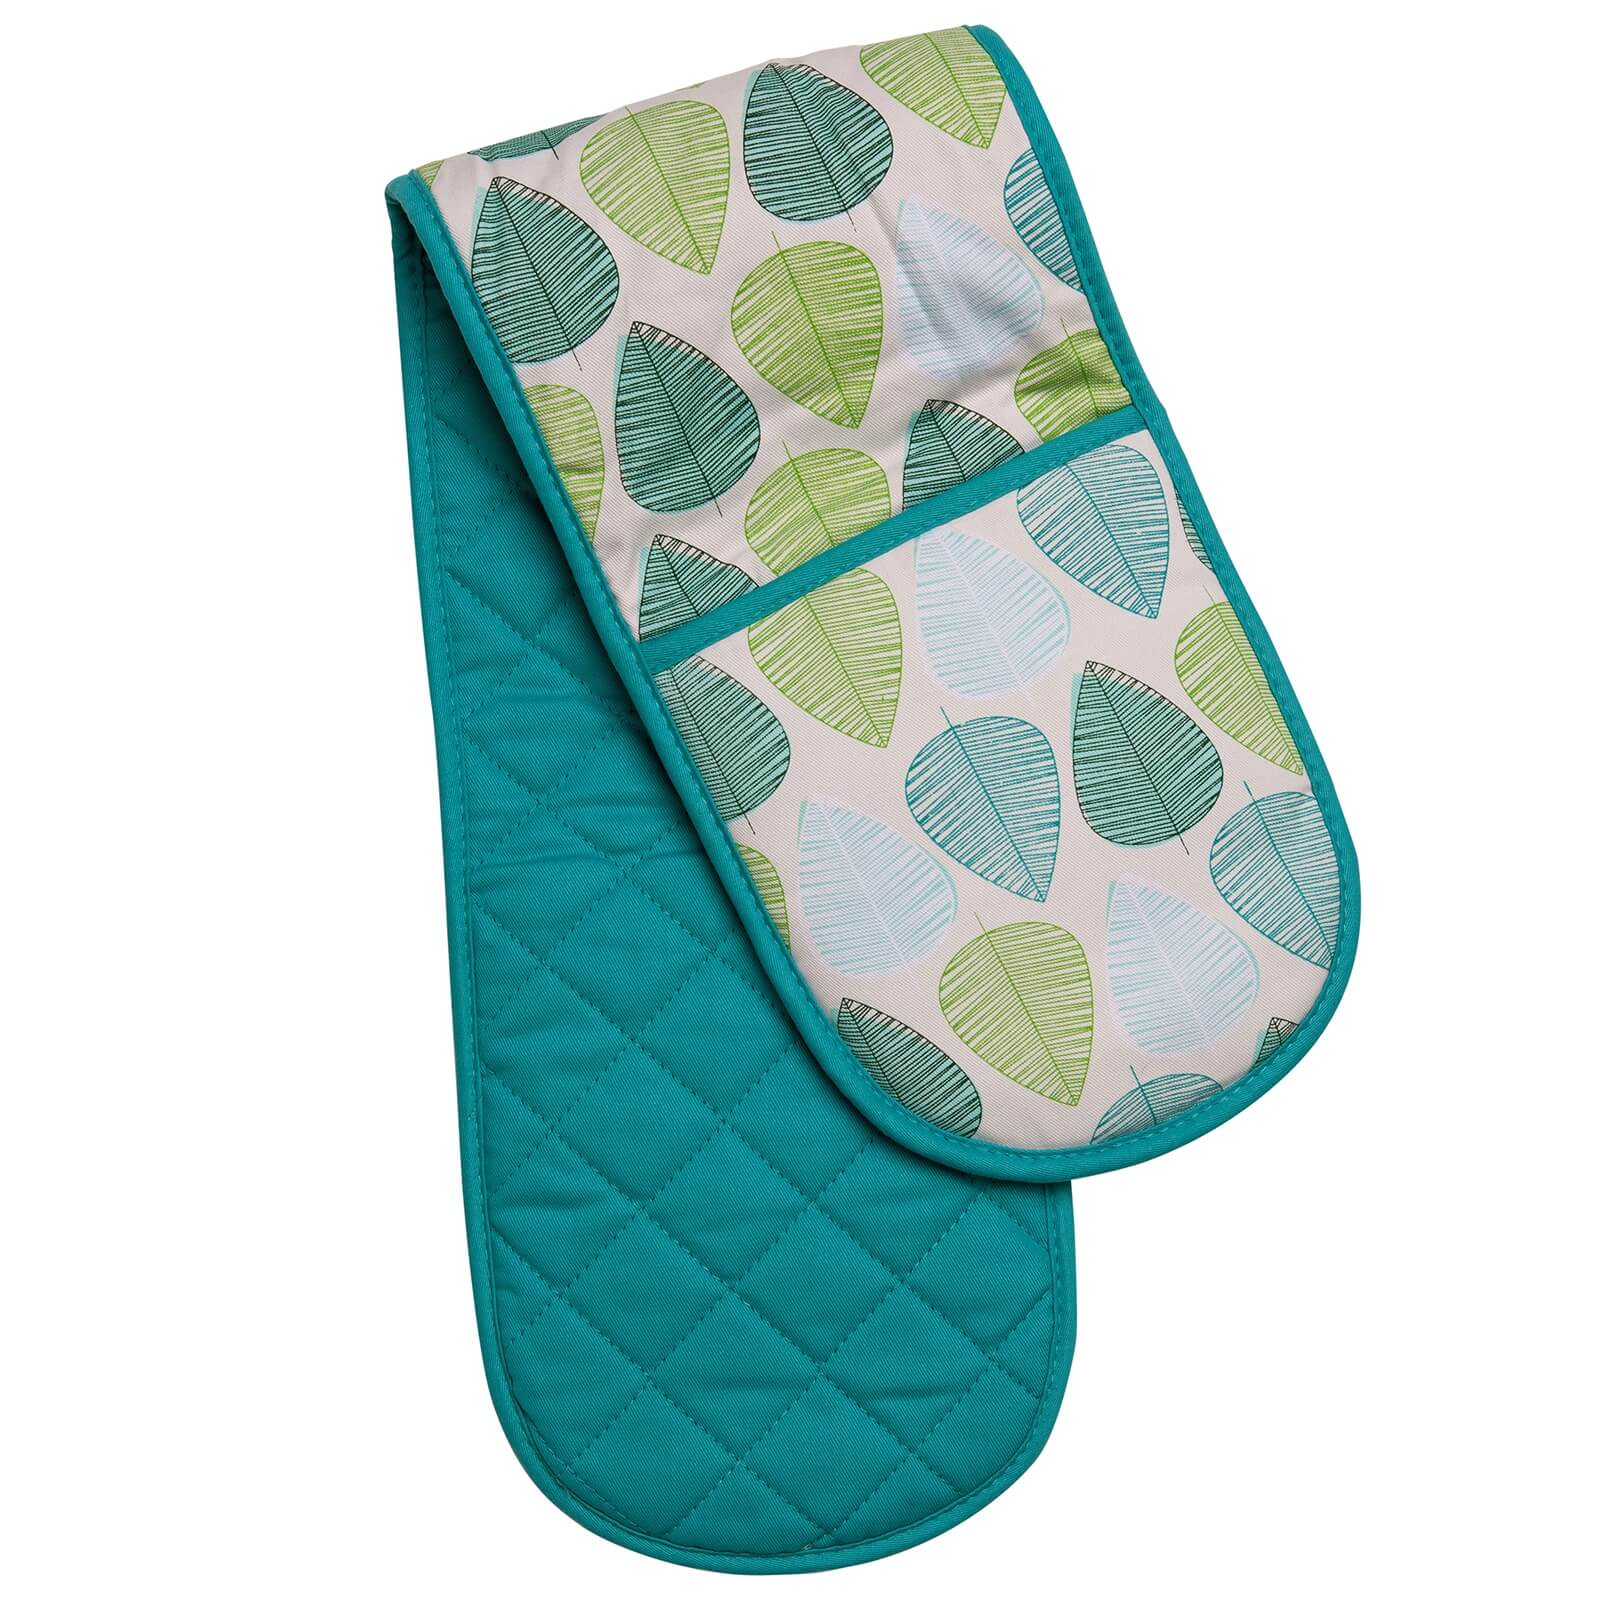 Green Leaf Double Oven Glove